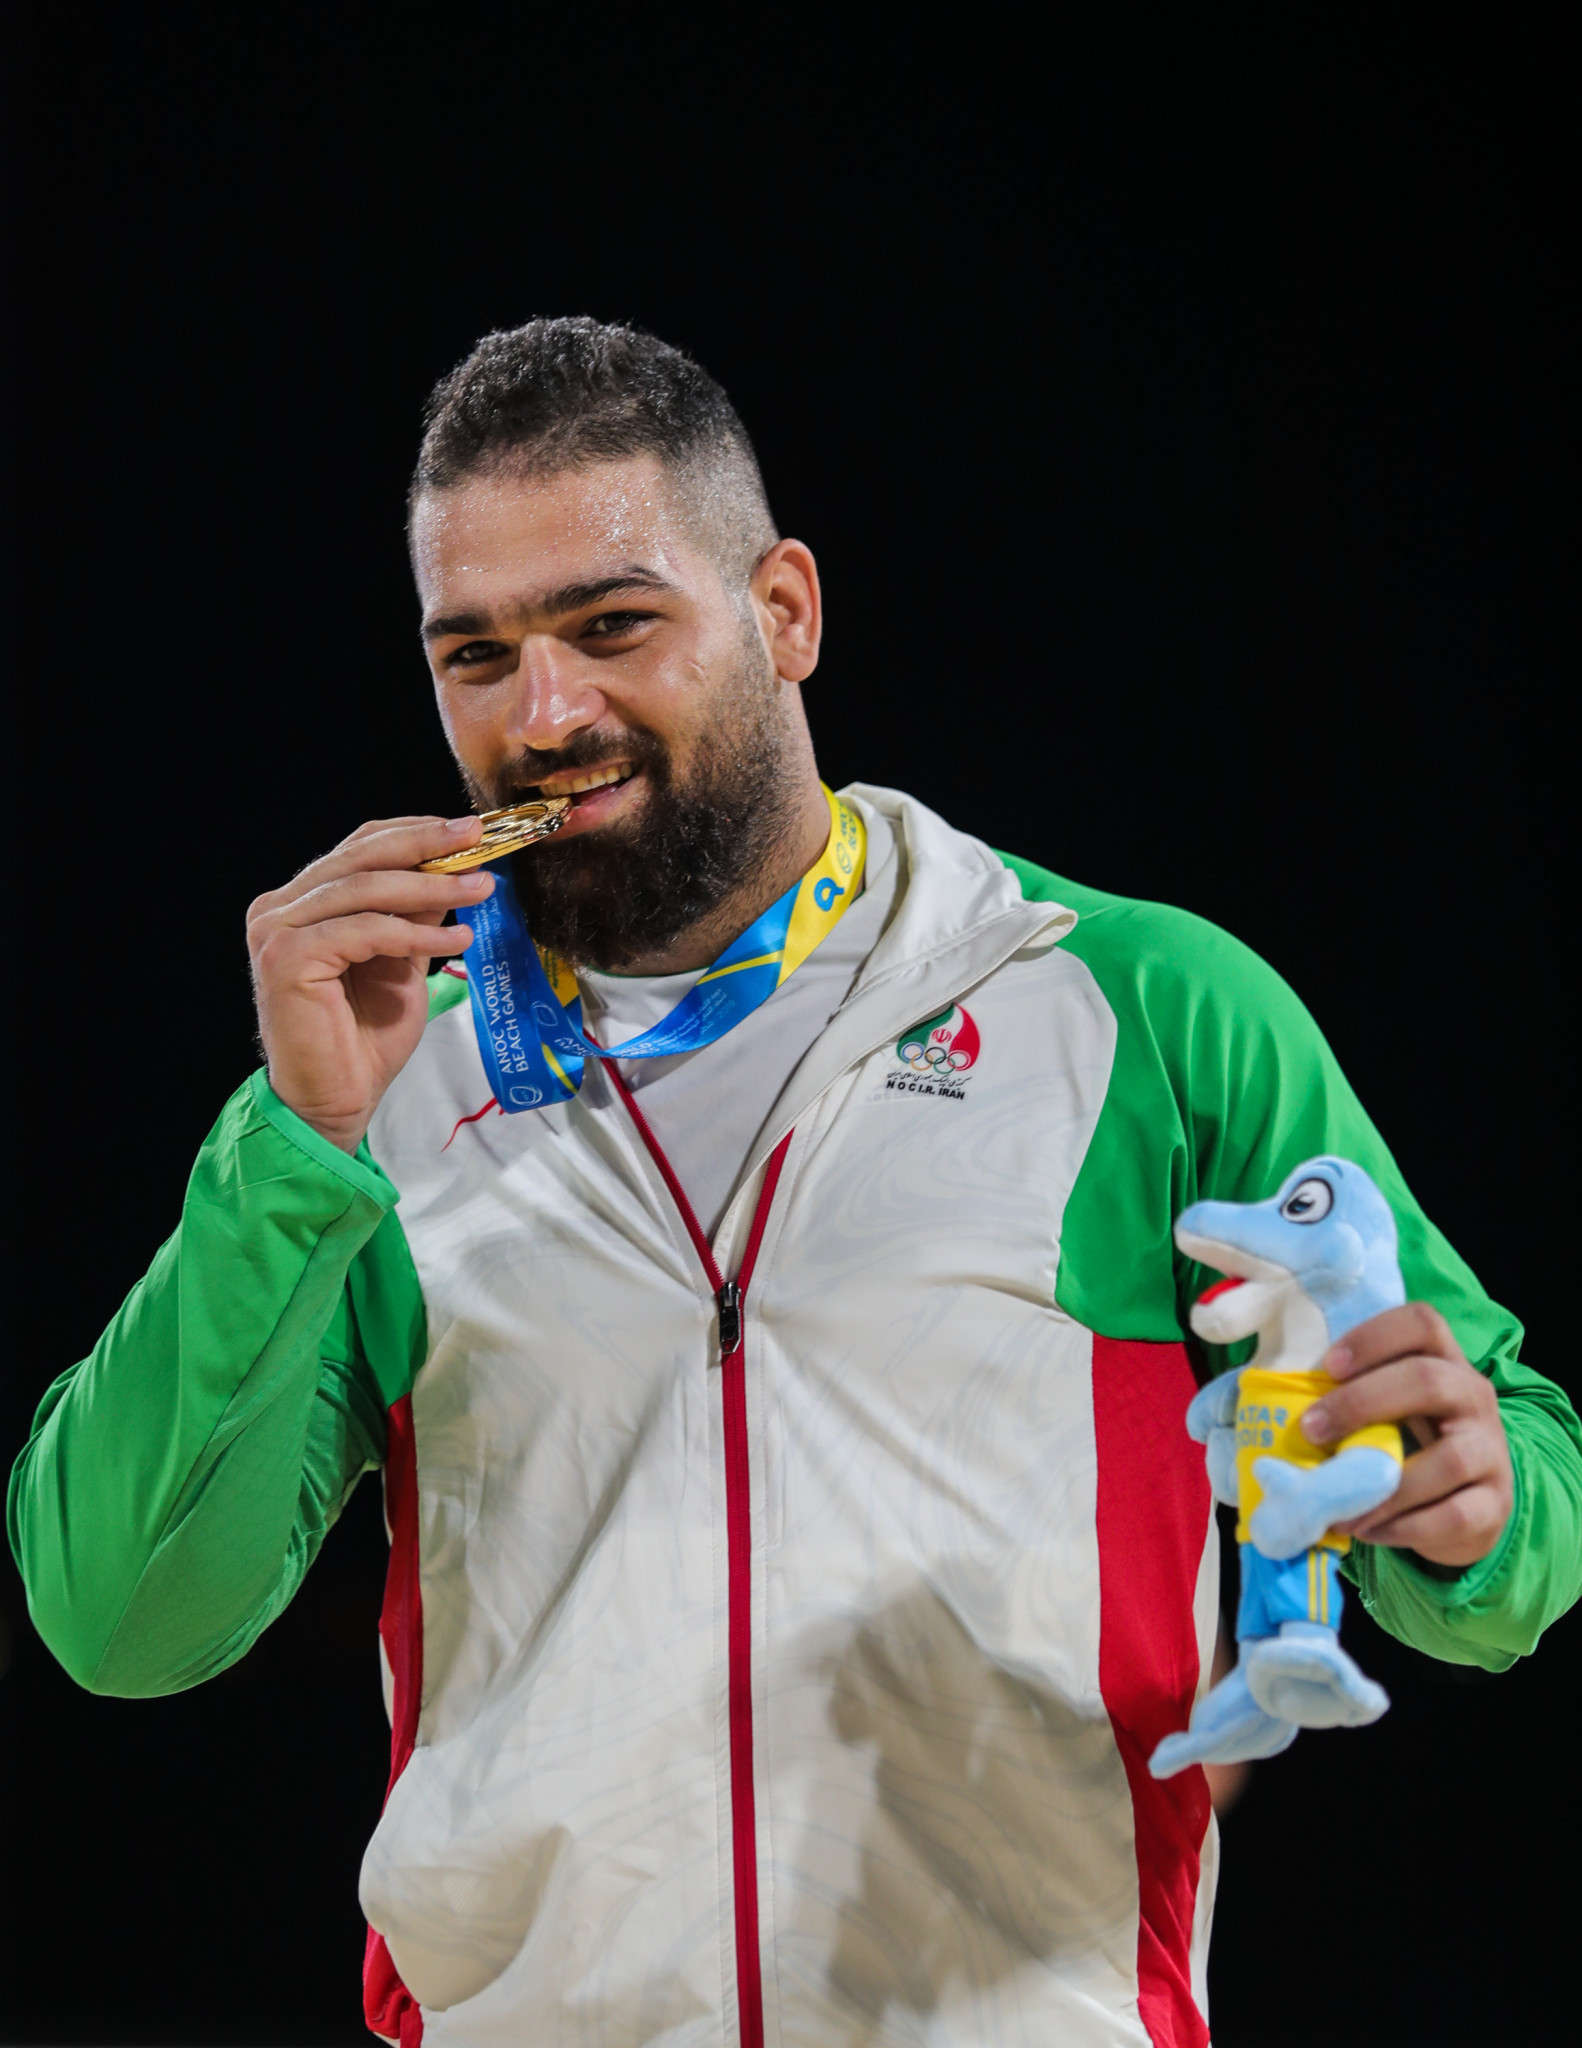 Iran's Pouya Rahmani won the men's over-90kg gold after studying videos of his previous matches his opponent, Turkey's Ufuk Yılmaz, and it clearly worked as he won 3-0 ©ANOC World Beach Games